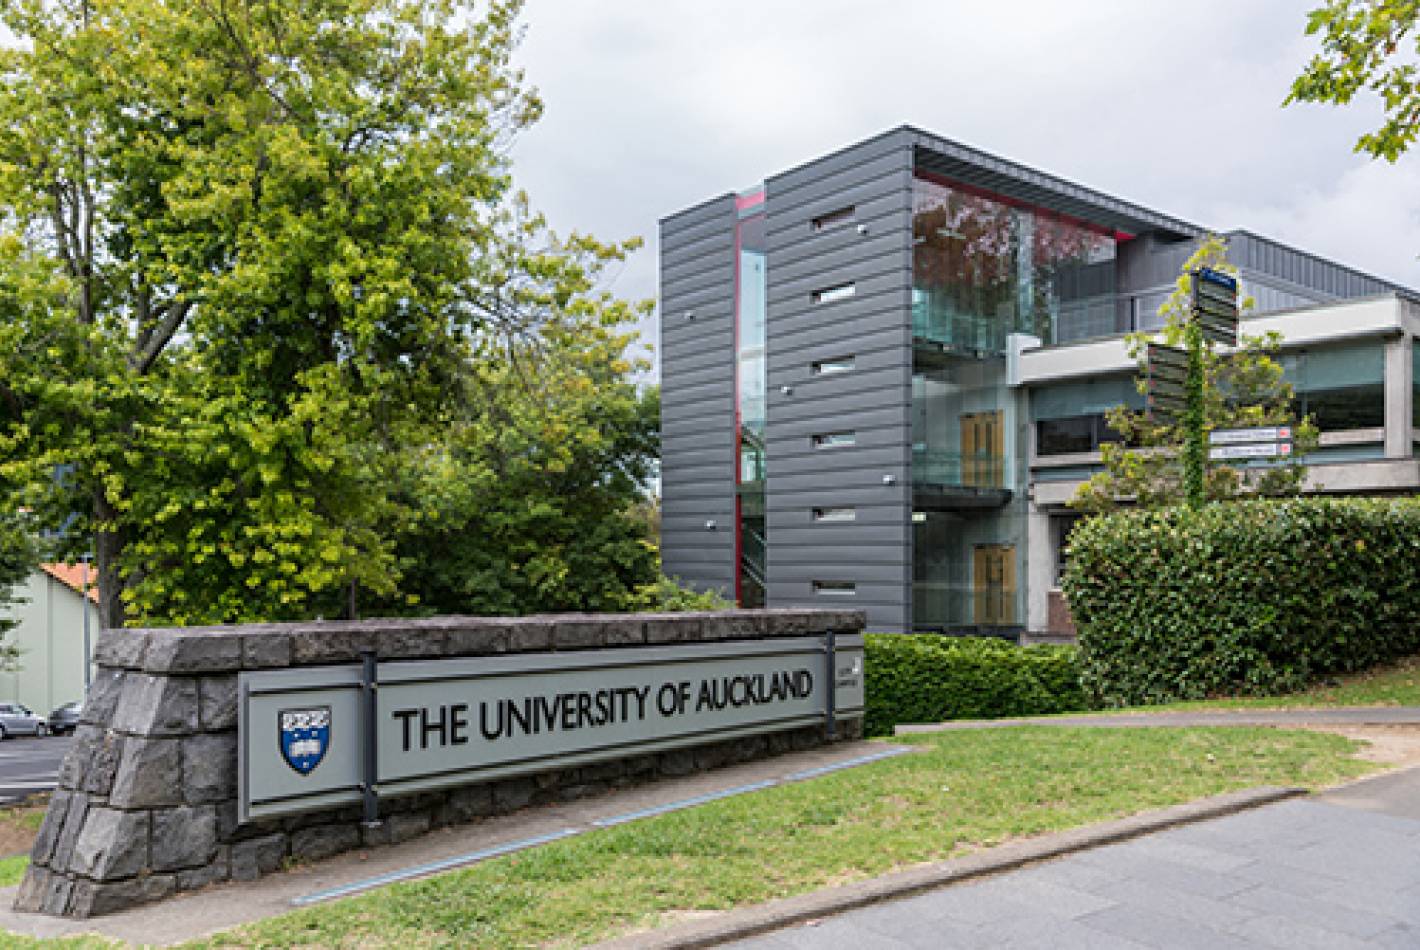 University of Auckland's Faculty of Education and Social Work building